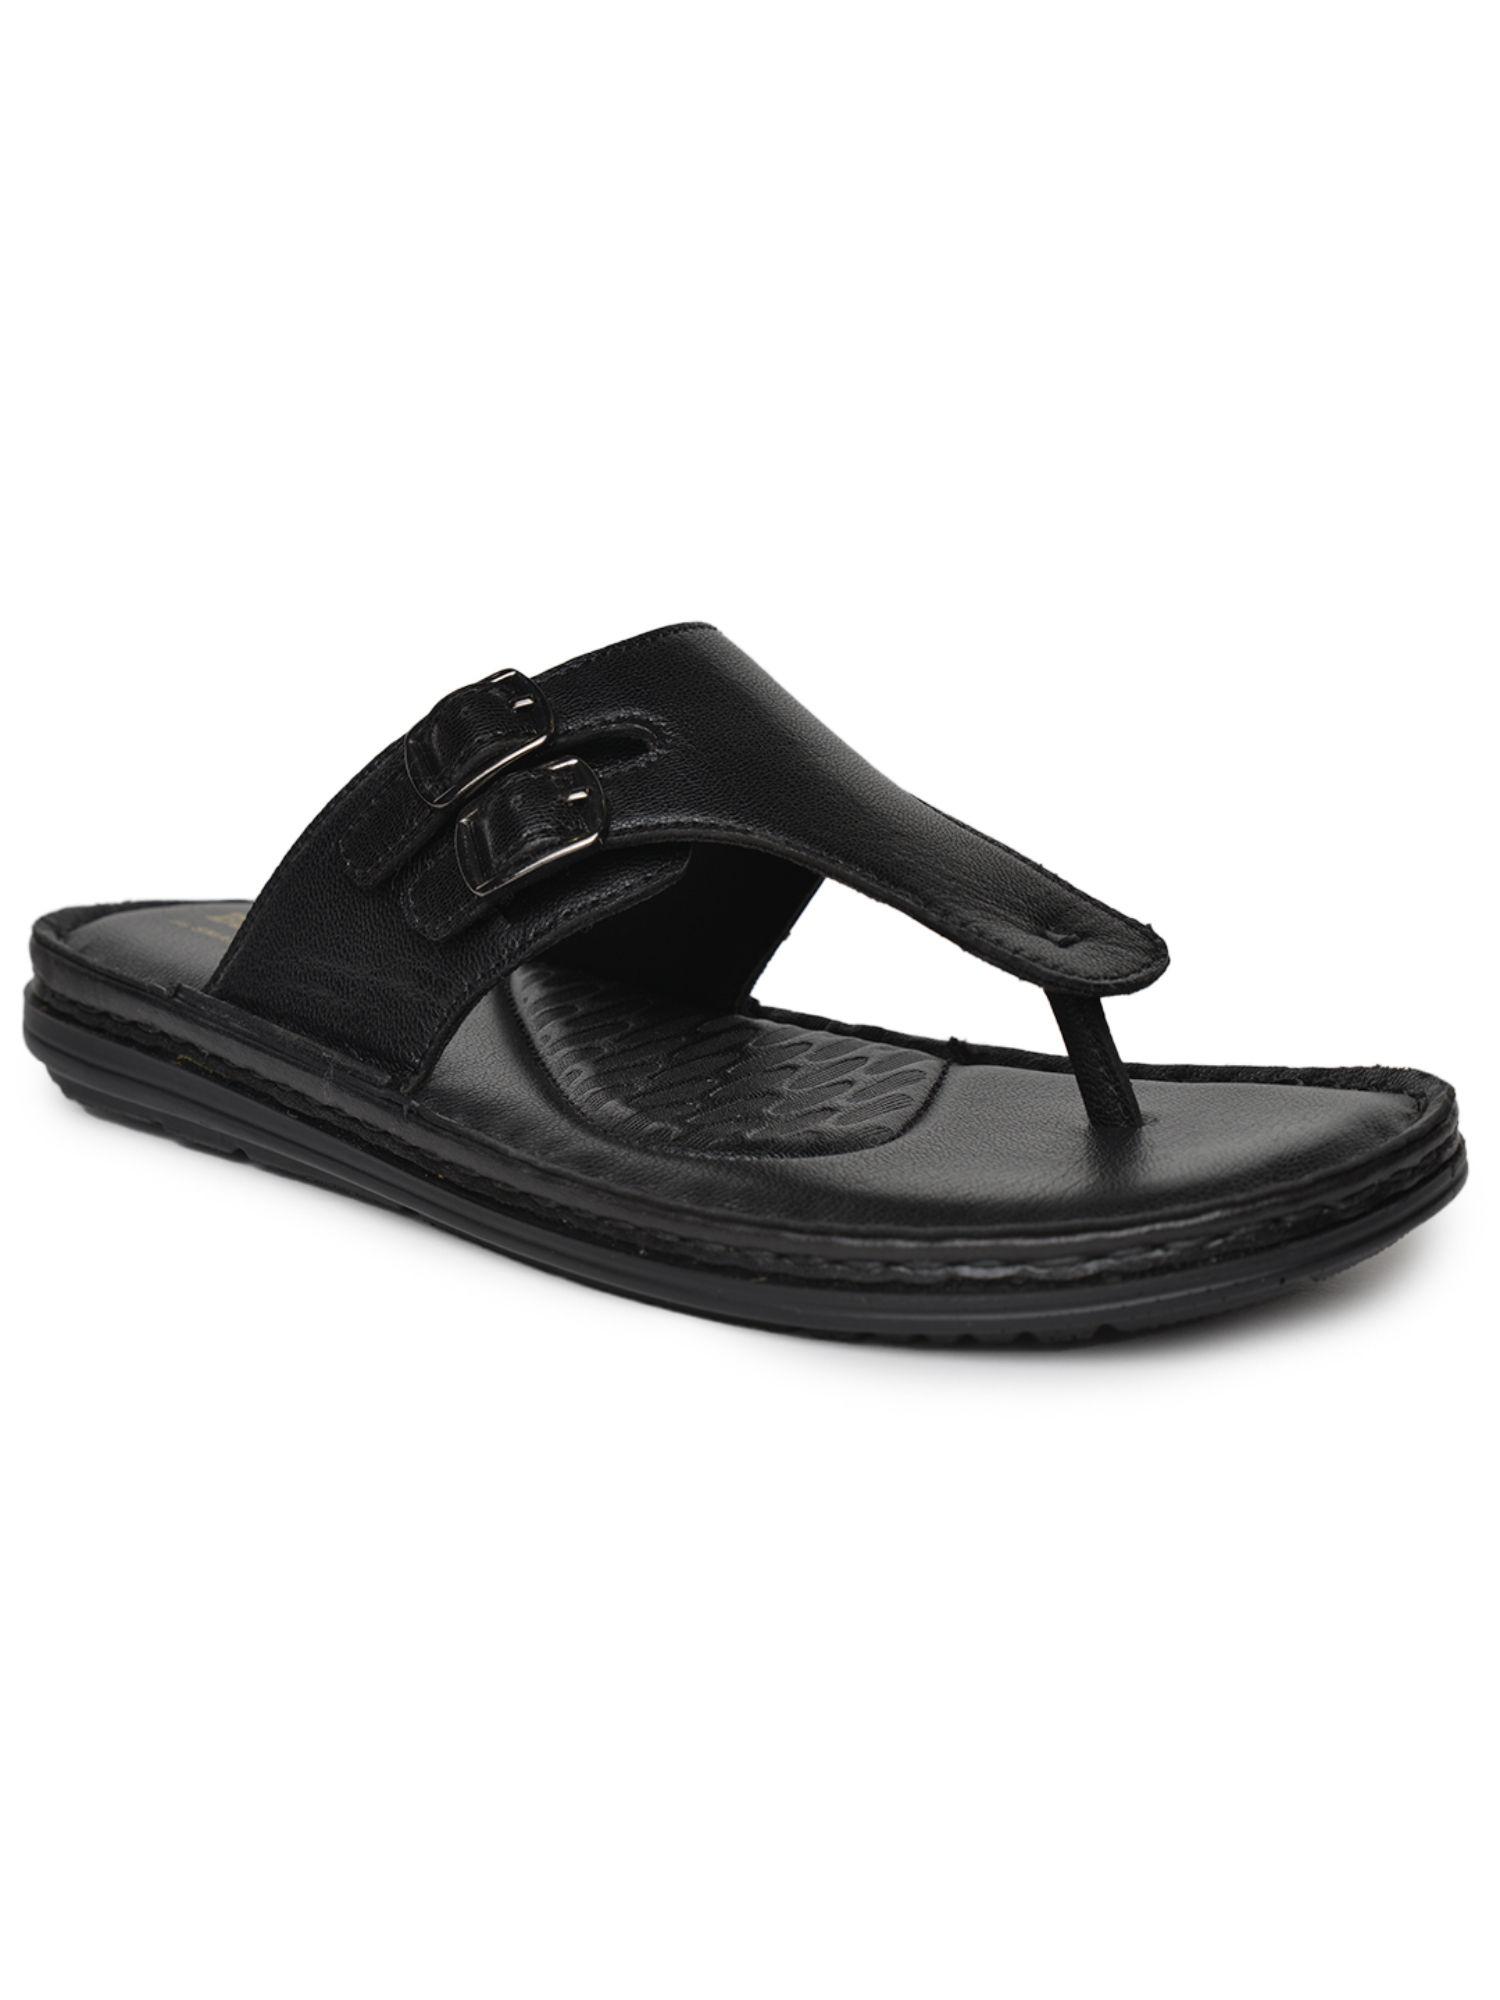 ace full grain natural leather black casual sandal chappal